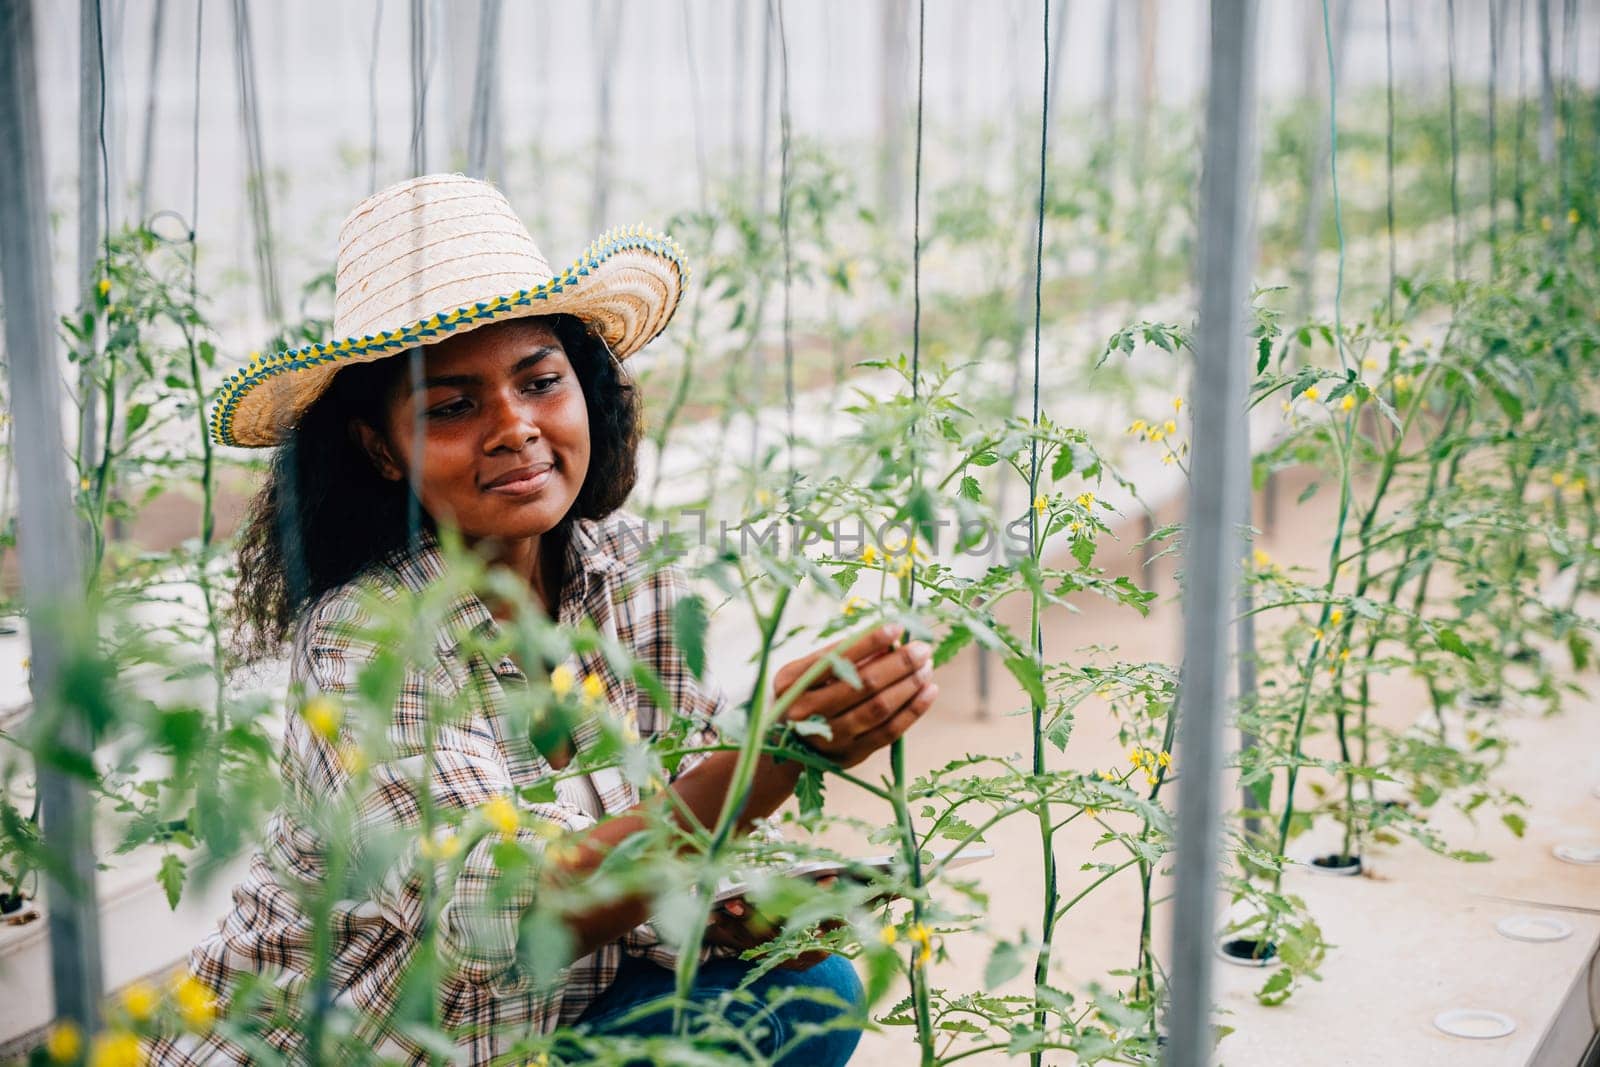 In a technological greenhouse a black woman agronomist checks and controls tomato quality with a tablet. Joyful farmer inspecting plants in an innovative farming environment.